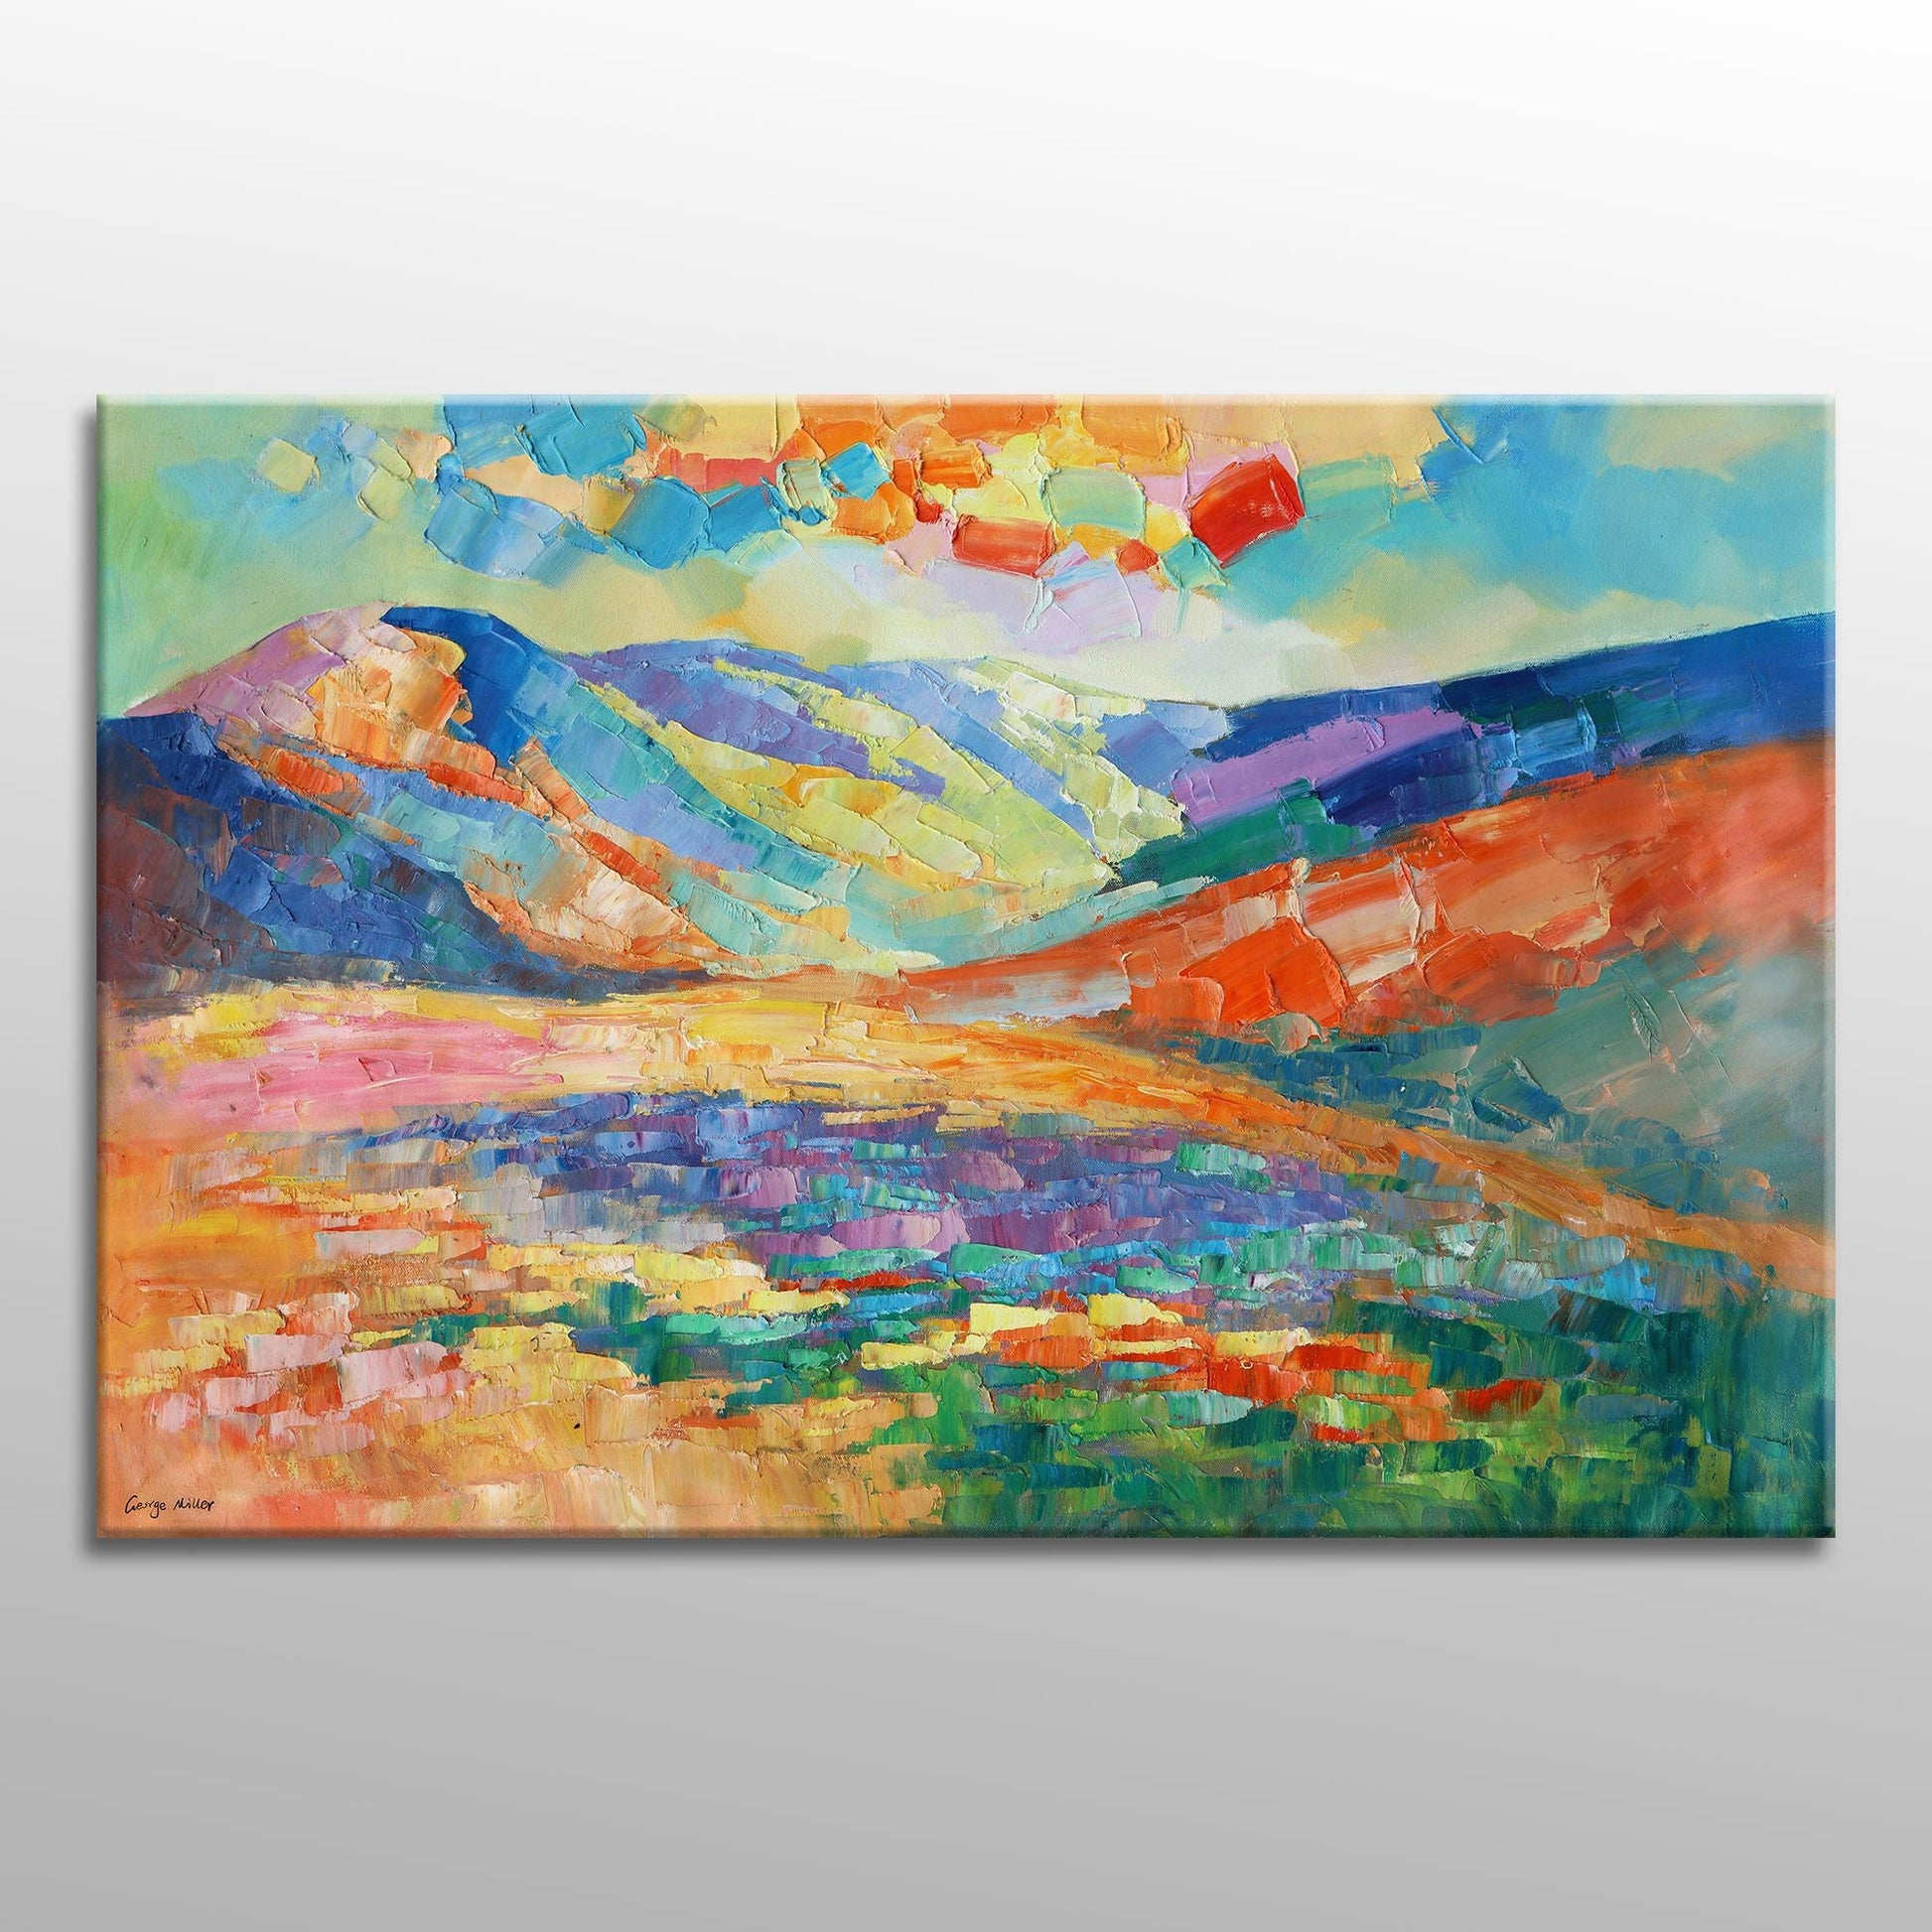 Large Oil Painting Landscape, Original Abstract Art, Painting Abstract, Wall Hanging, Modern Painting, Large Abstract Painting, Abstract Art